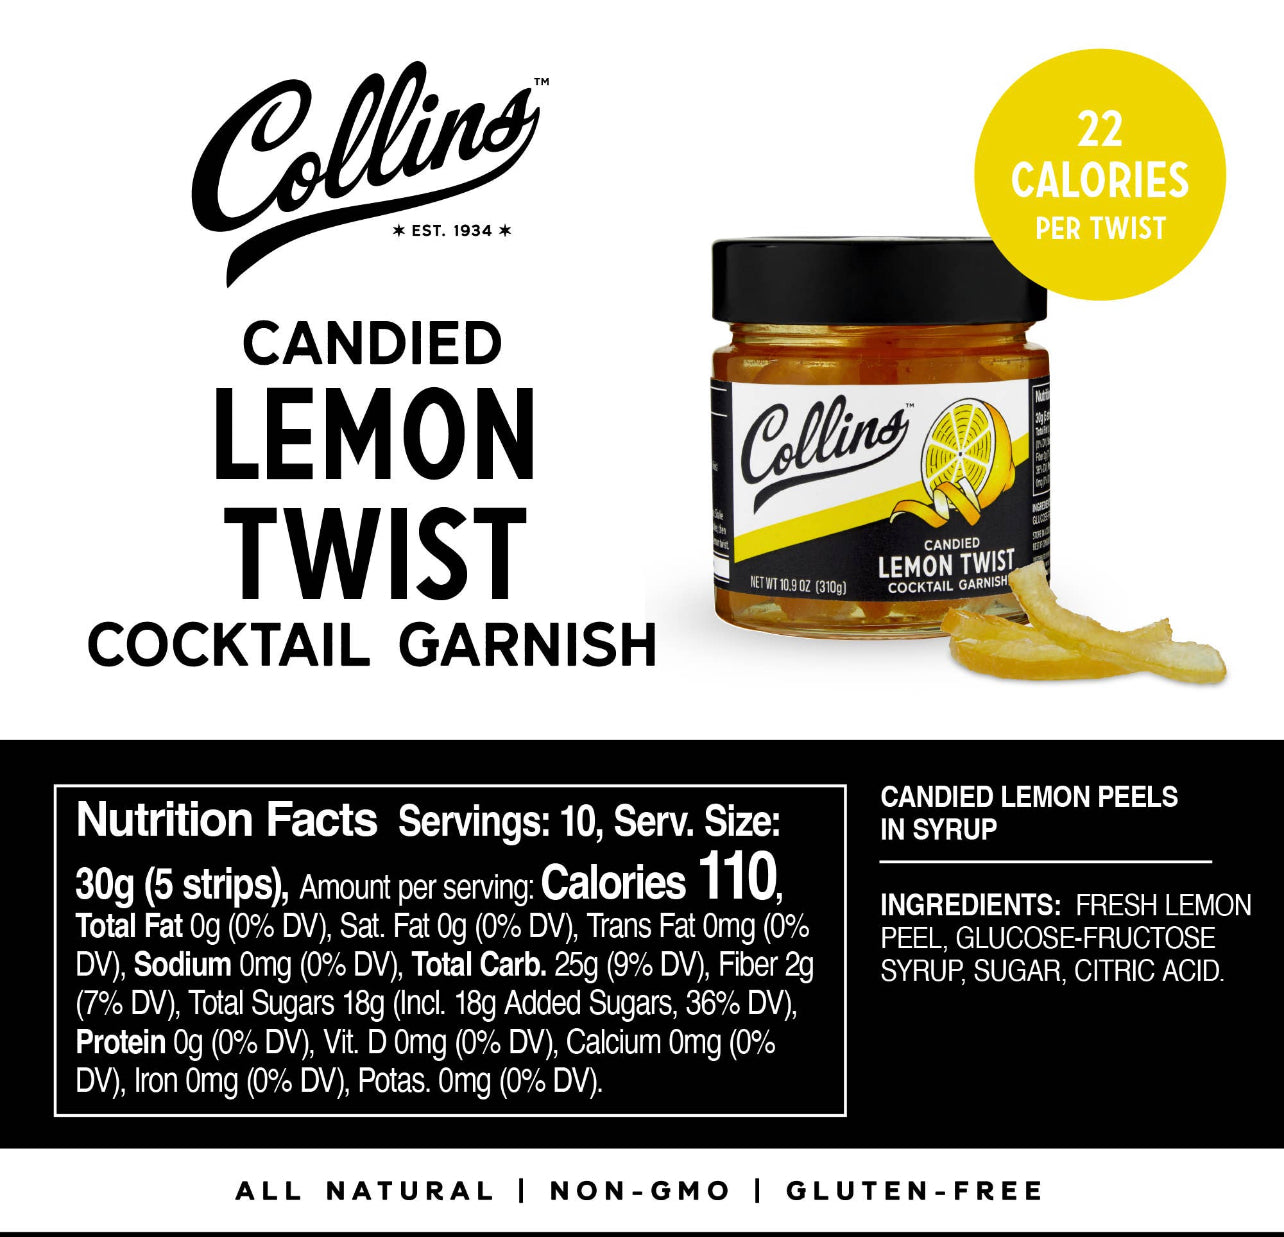 nutritional information for the 10.9 oz jar of candied lemon twist cocktail garnish by Collins